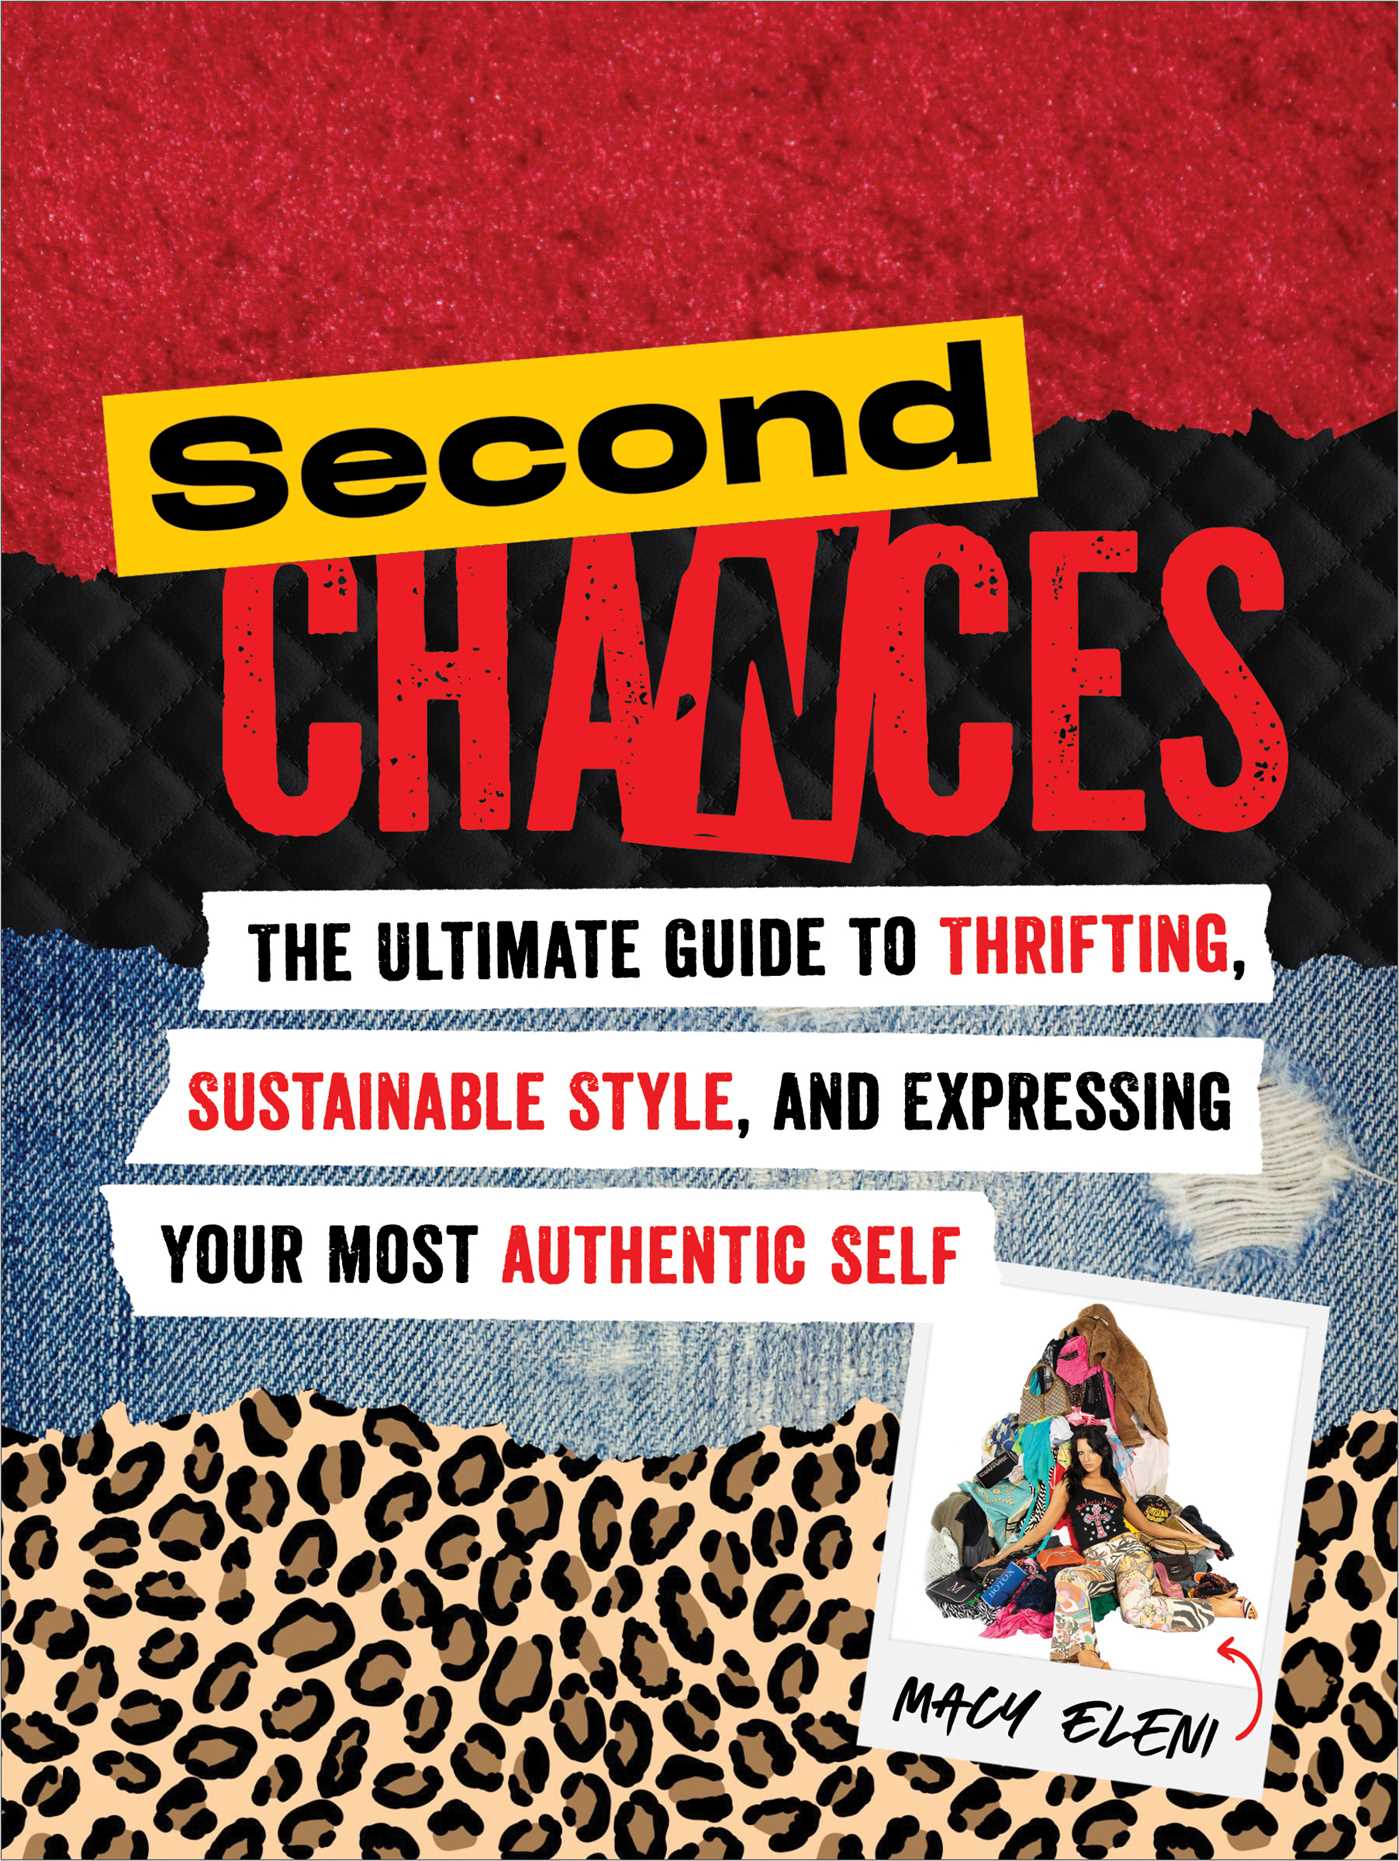 SECOND CHANCES - THE ULTIMATE GUIDE TO THRIFTING , SUSTAINABLE STYLE AND EXPRESSING YOUR MOST AUTHENTIC SELF